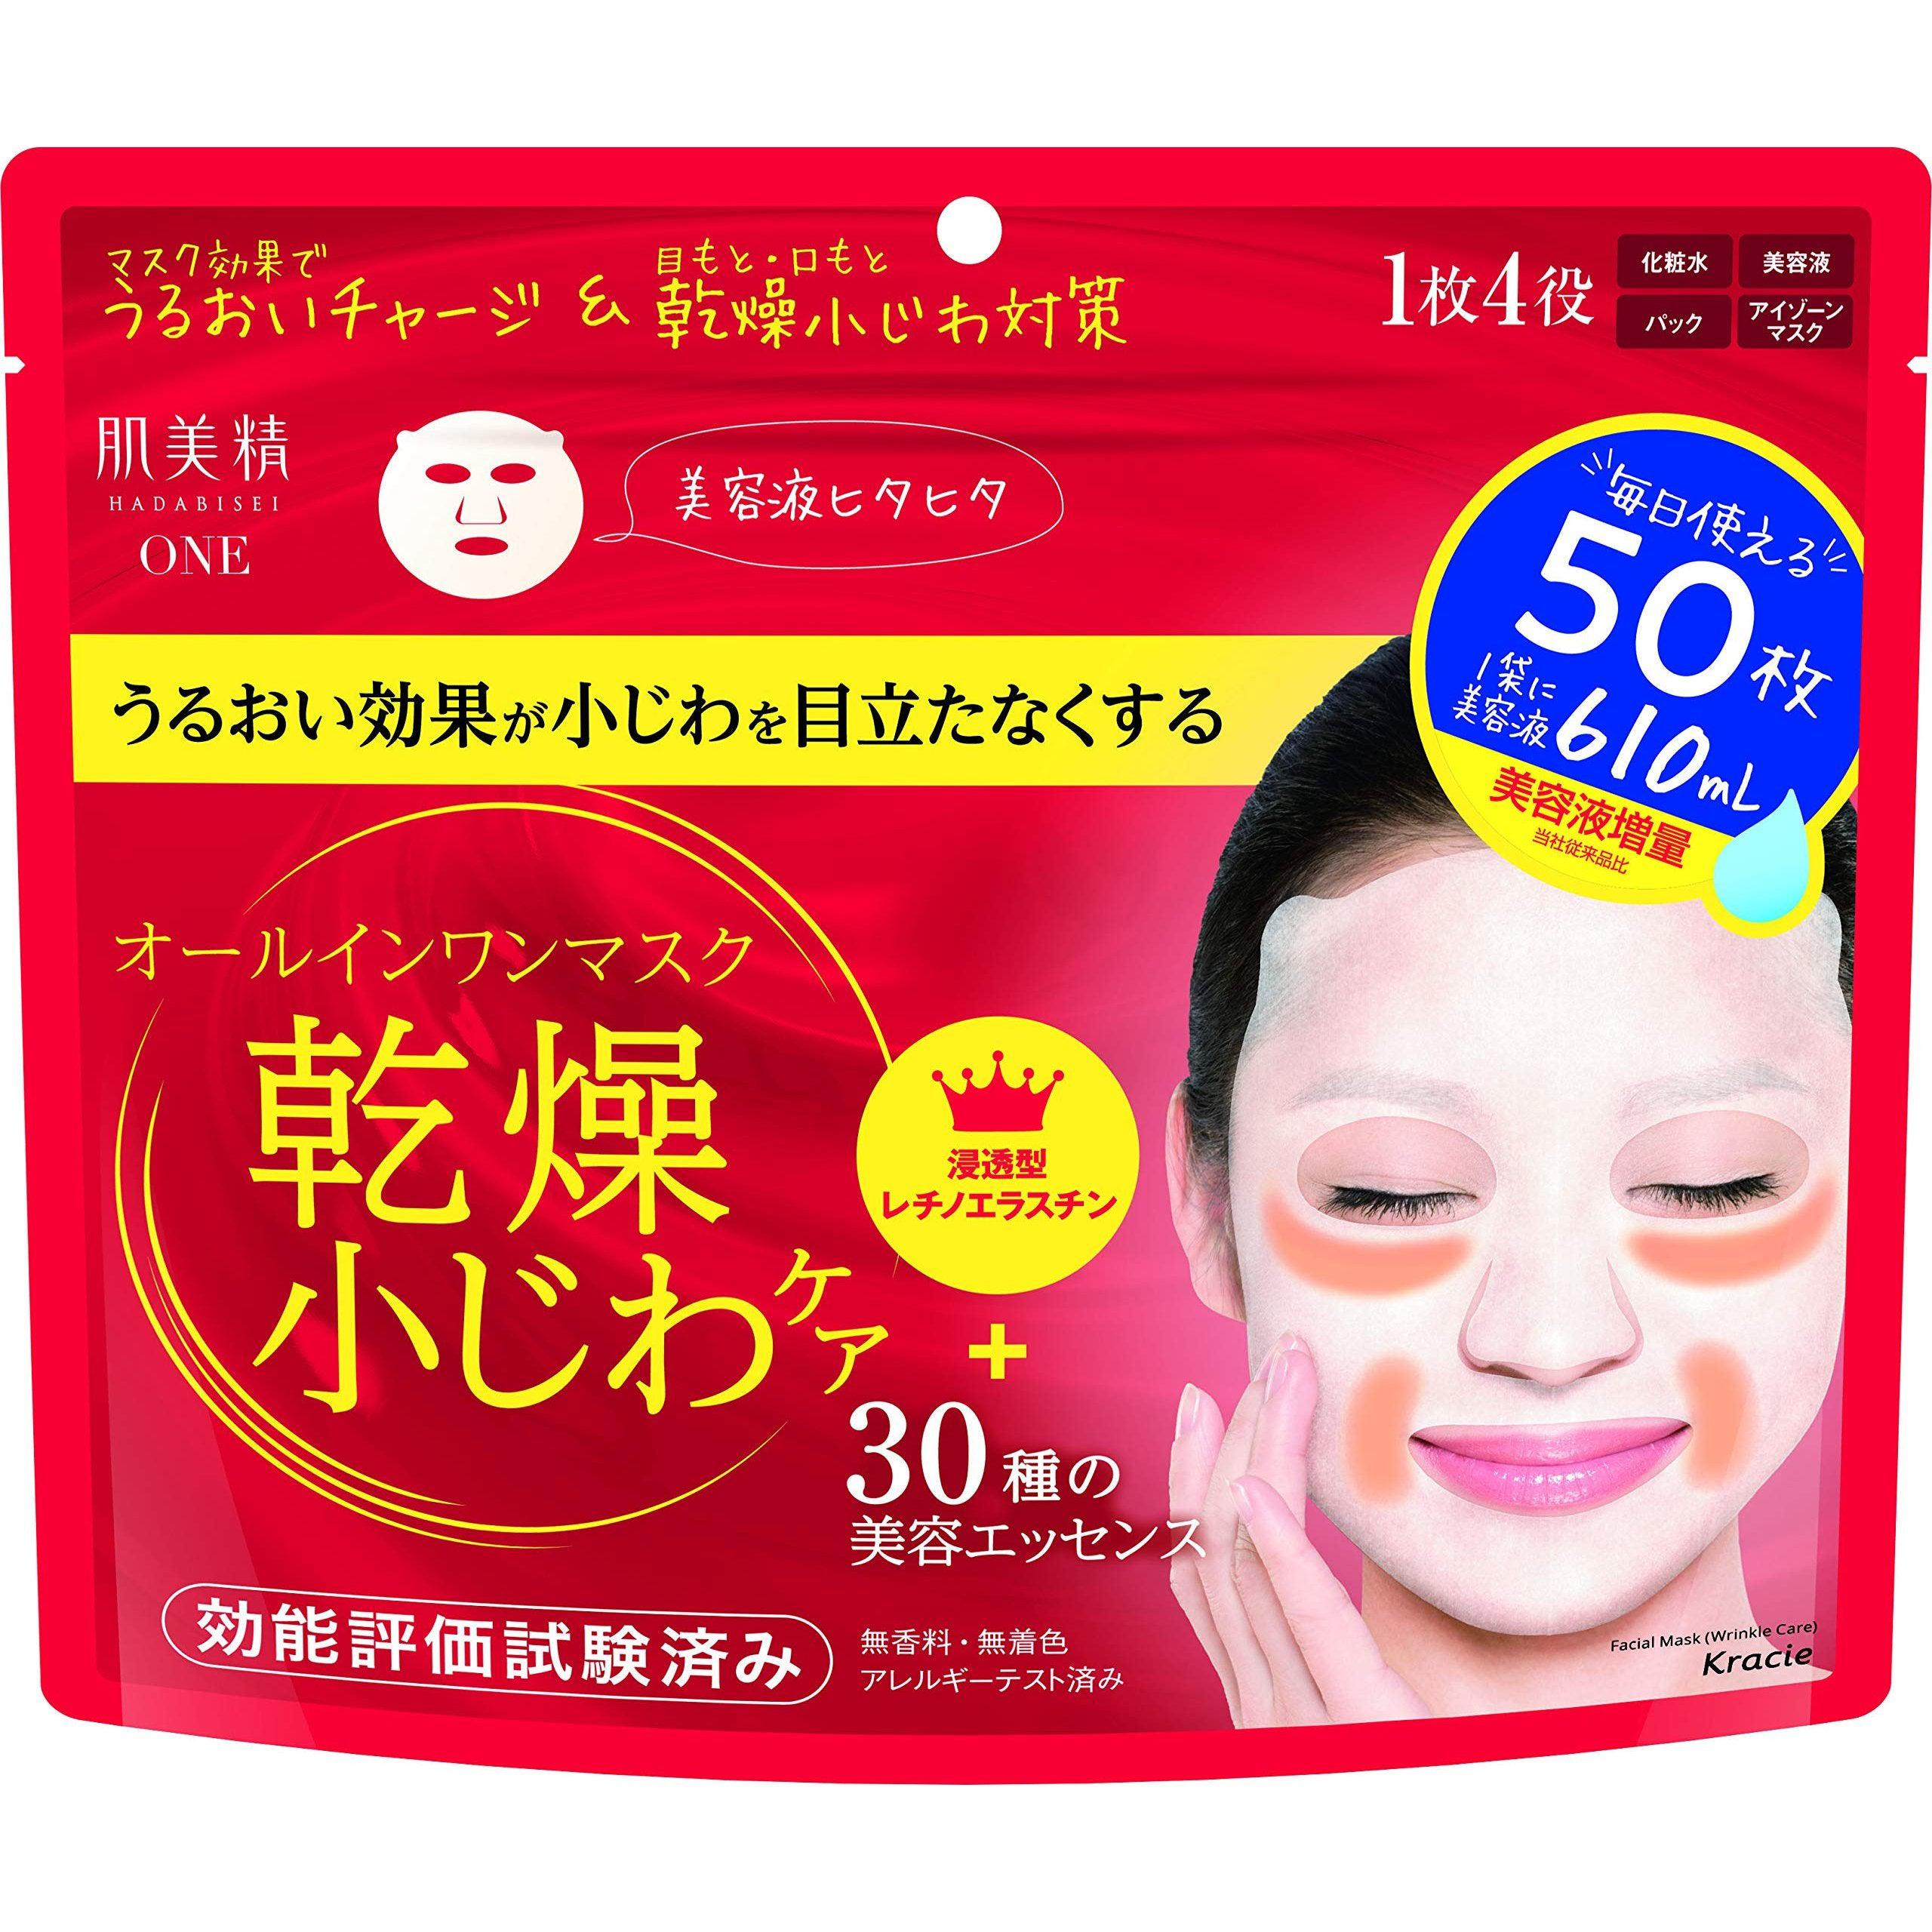 Kracie Hadabisei One All-In-One Anti-Wrinkle Facial Sheet Mask 50 ct.